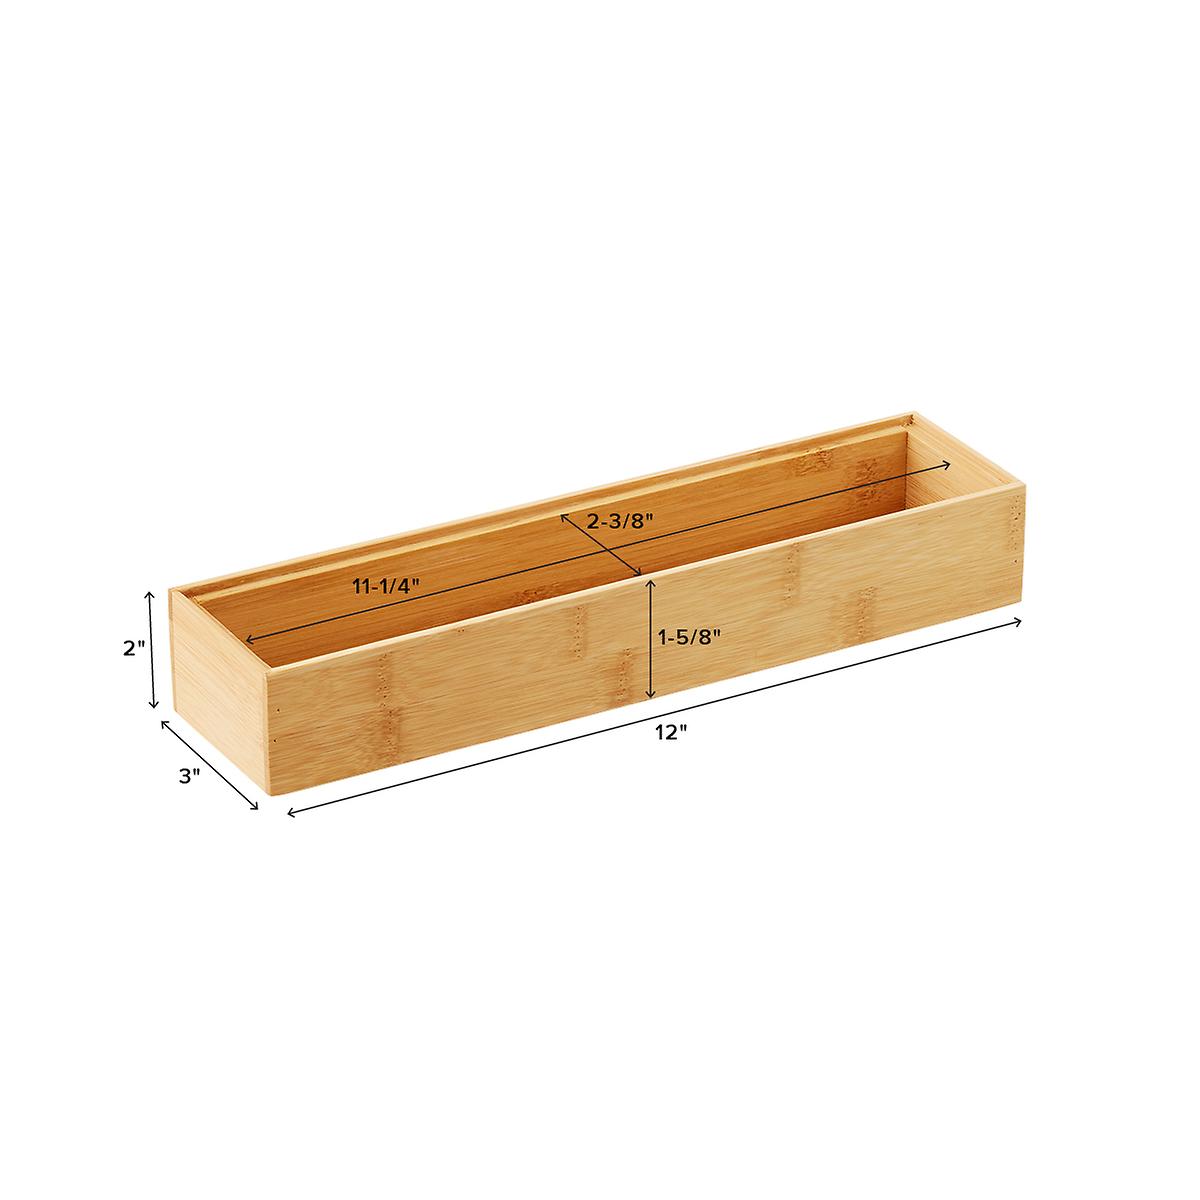 12" x 18" Bamboo Drawer Organizer Starter Kit The Container Store